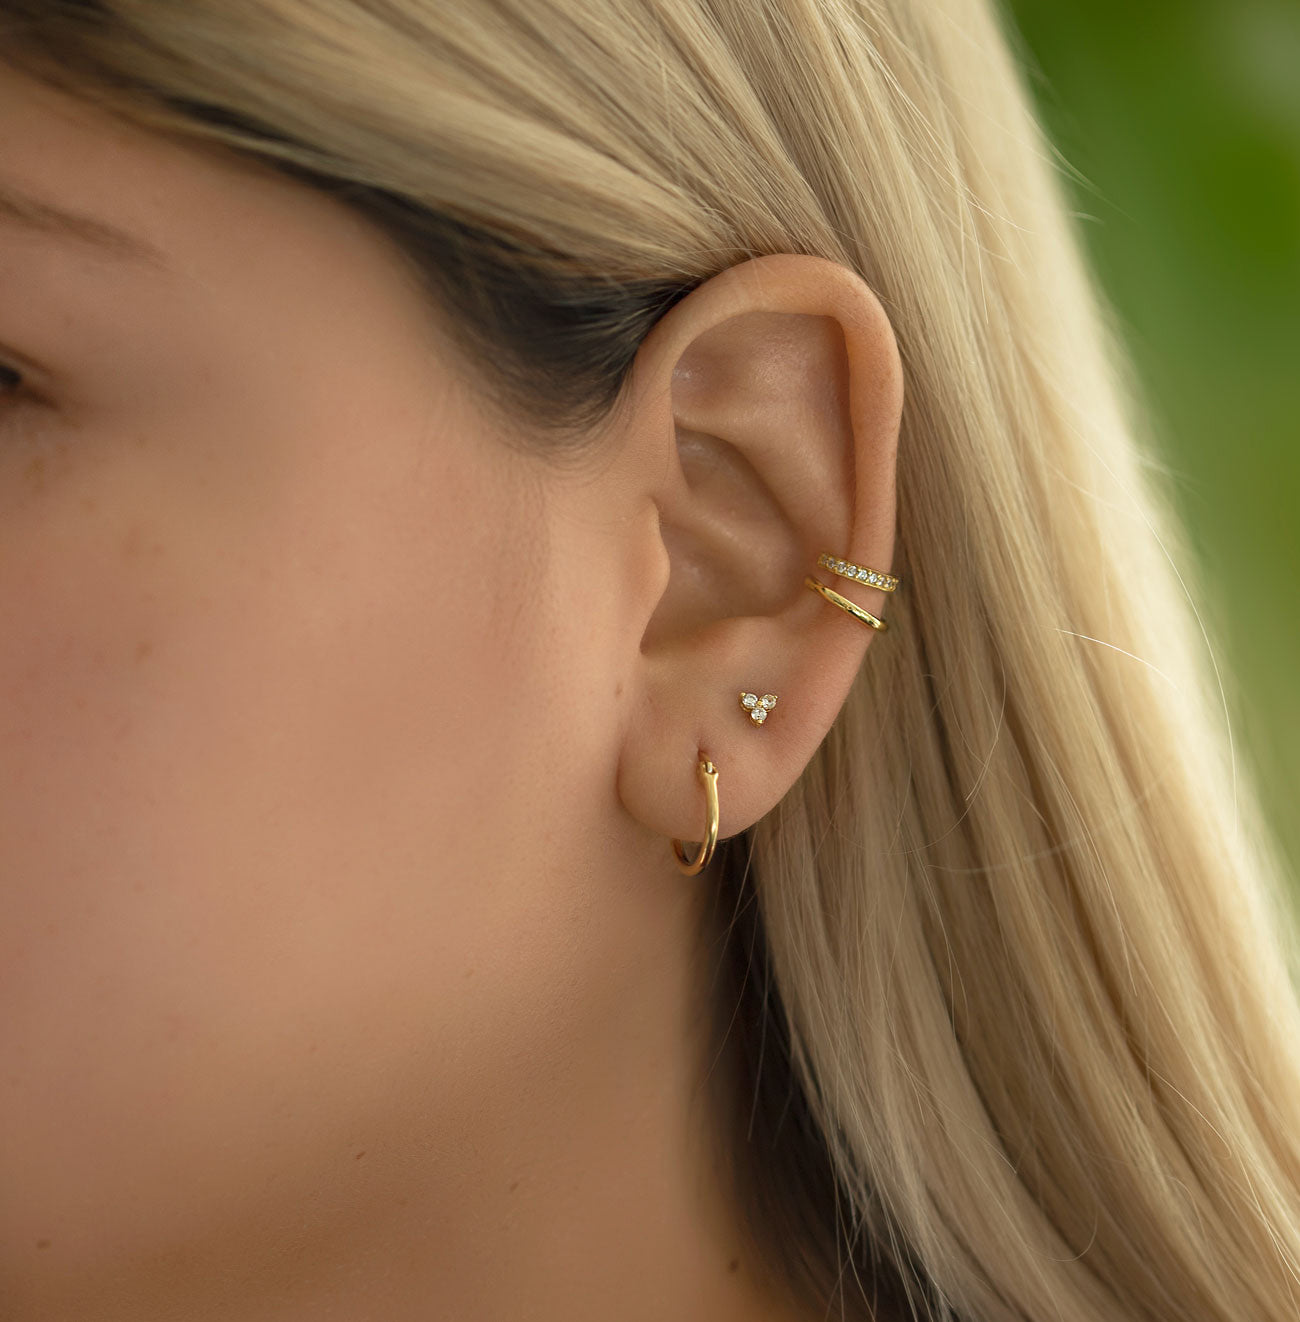 Curated Ear with Classic Gold Huggie Earring, Clover Stud Earring, Eternity and Pave Ear Cuff